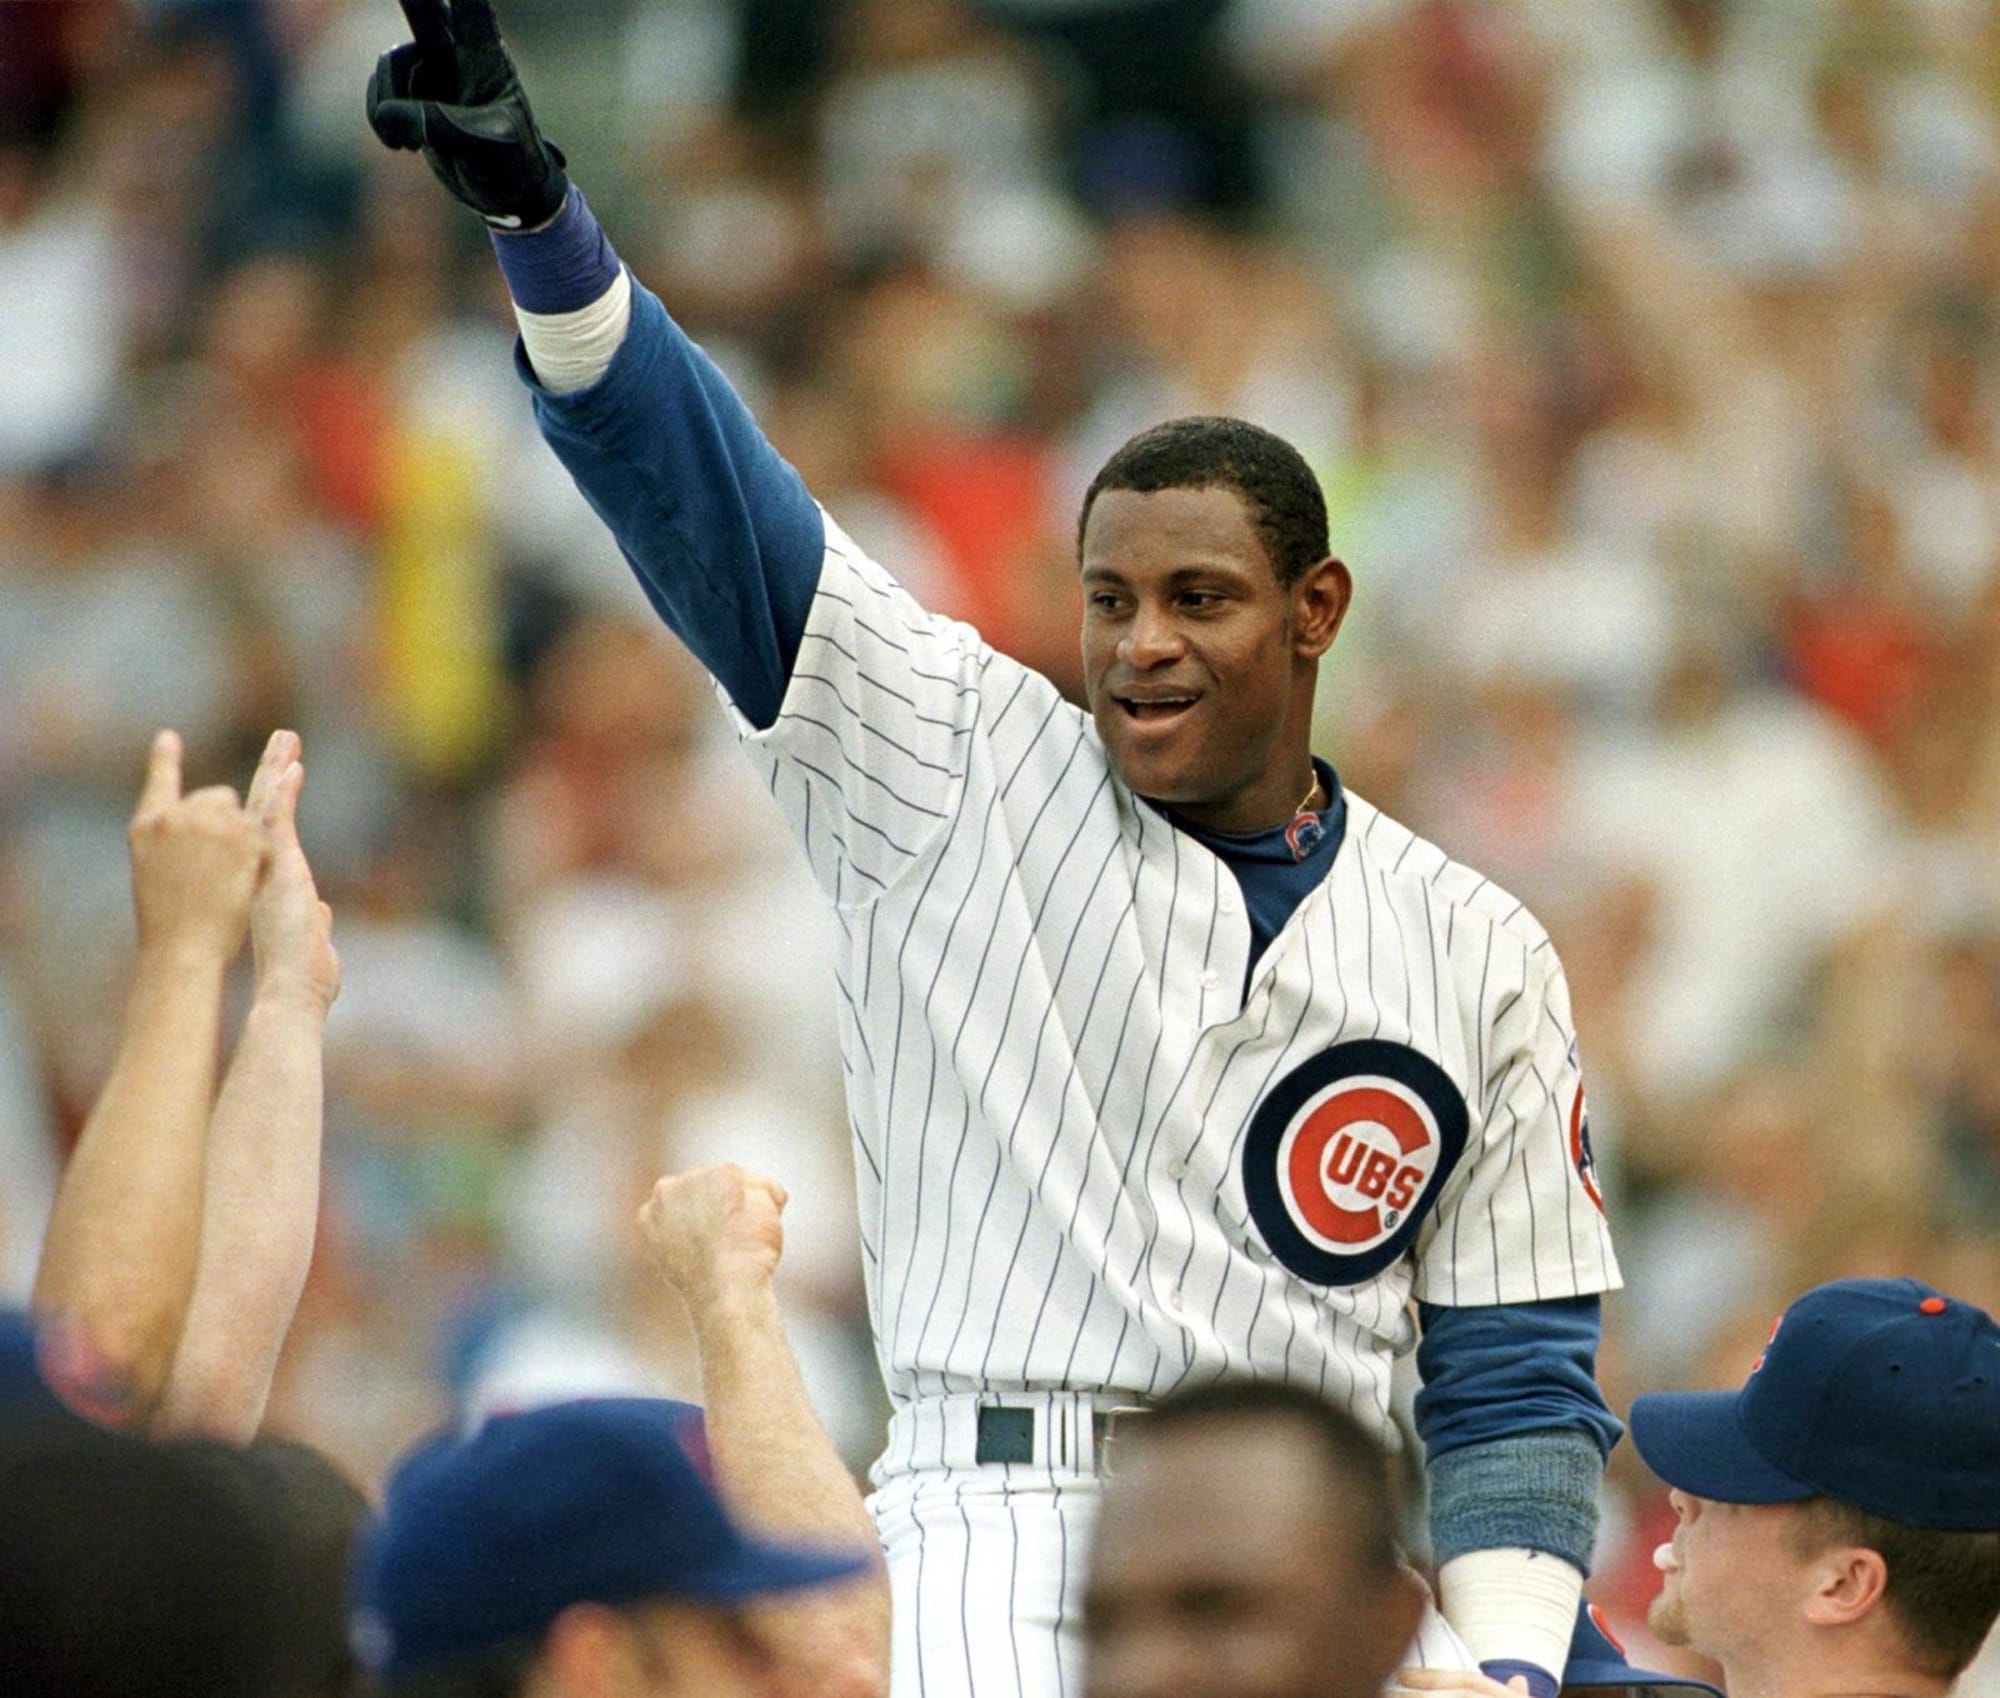 Sammy Sosa #21 Chicago Baseball Player Should Be in Hall of Fame